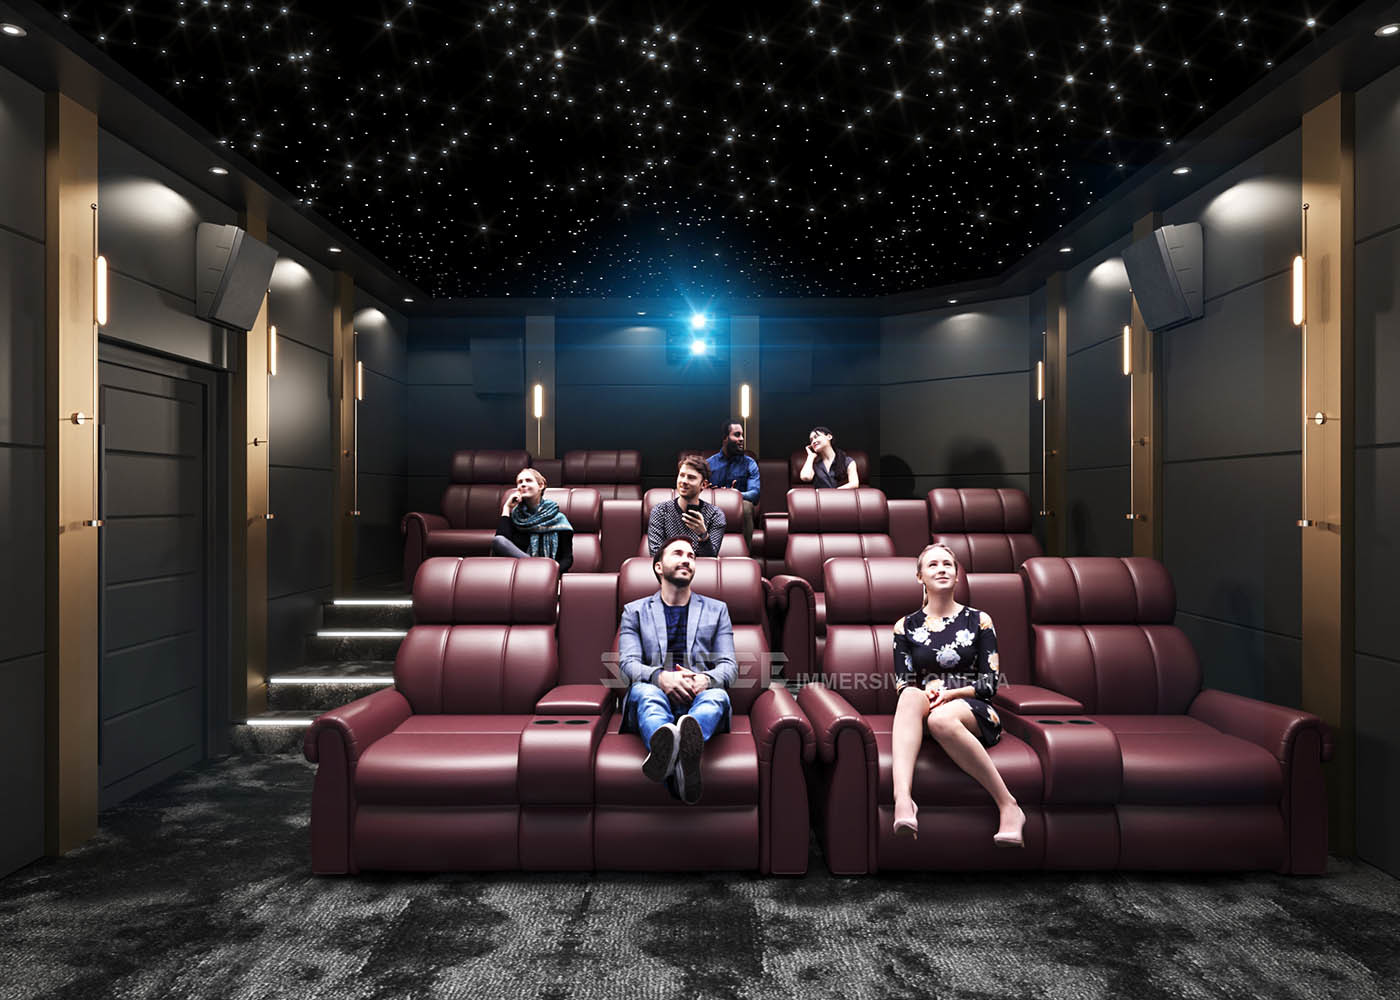 Electric Leather Sofa Home Cinema System With Surround Speaker Subwoofer Projector For Movies